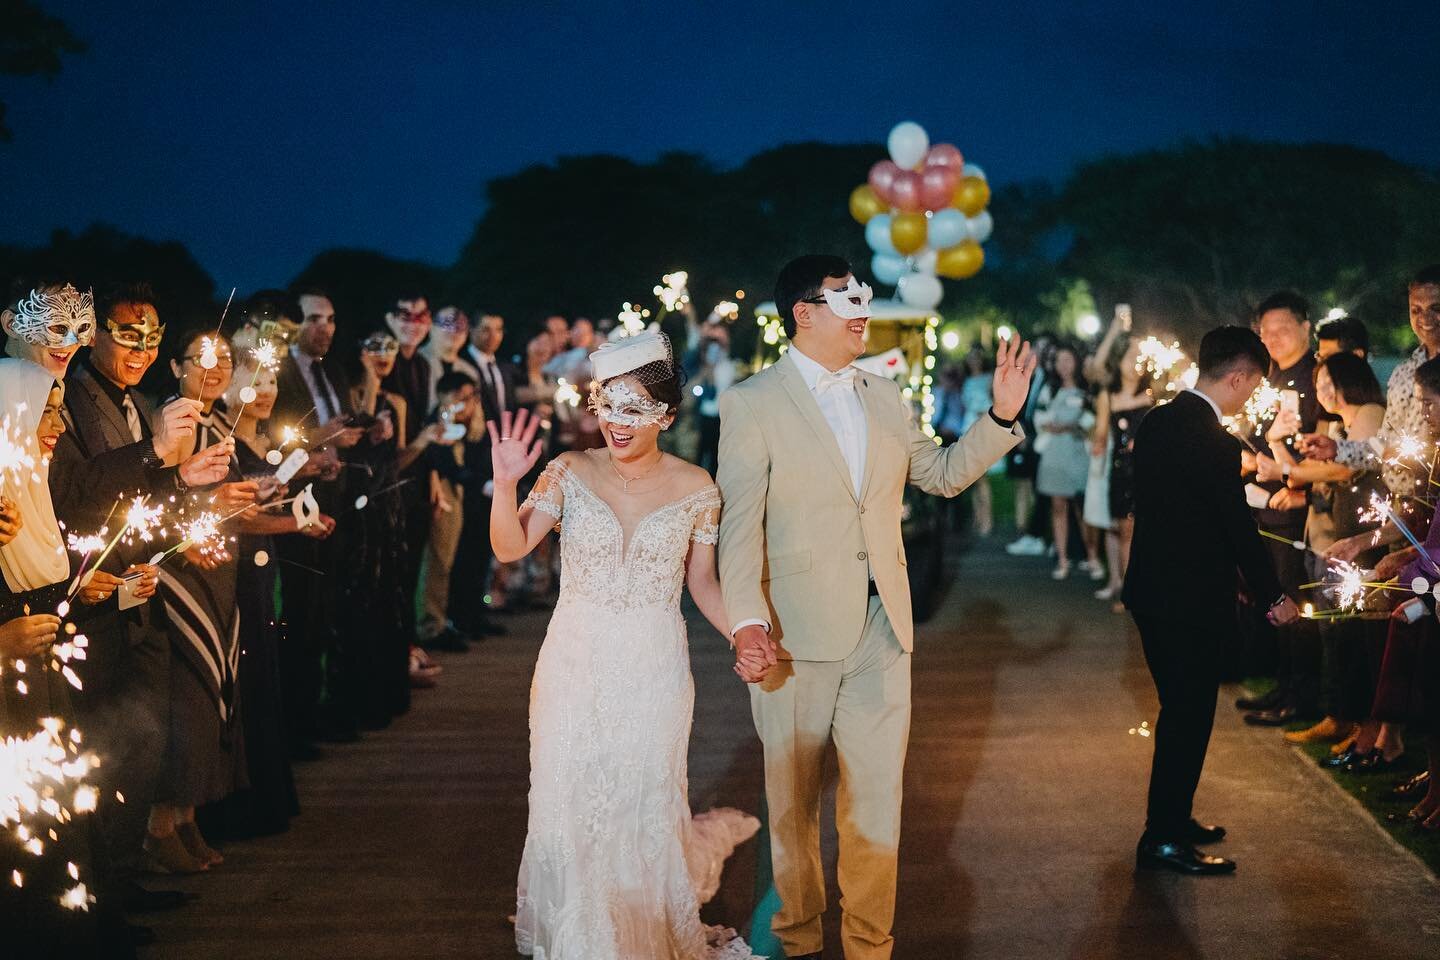 Philip &amp; Mandy &mdash; 2 December 2023 ❤️

This sparkler entrance with 300 guests was definitely one of the highlights of the night. We are so glad we made it happen 🥹

Photography: @amabelleang_ 
Videography: @linstudios 
Styling: @linstudios